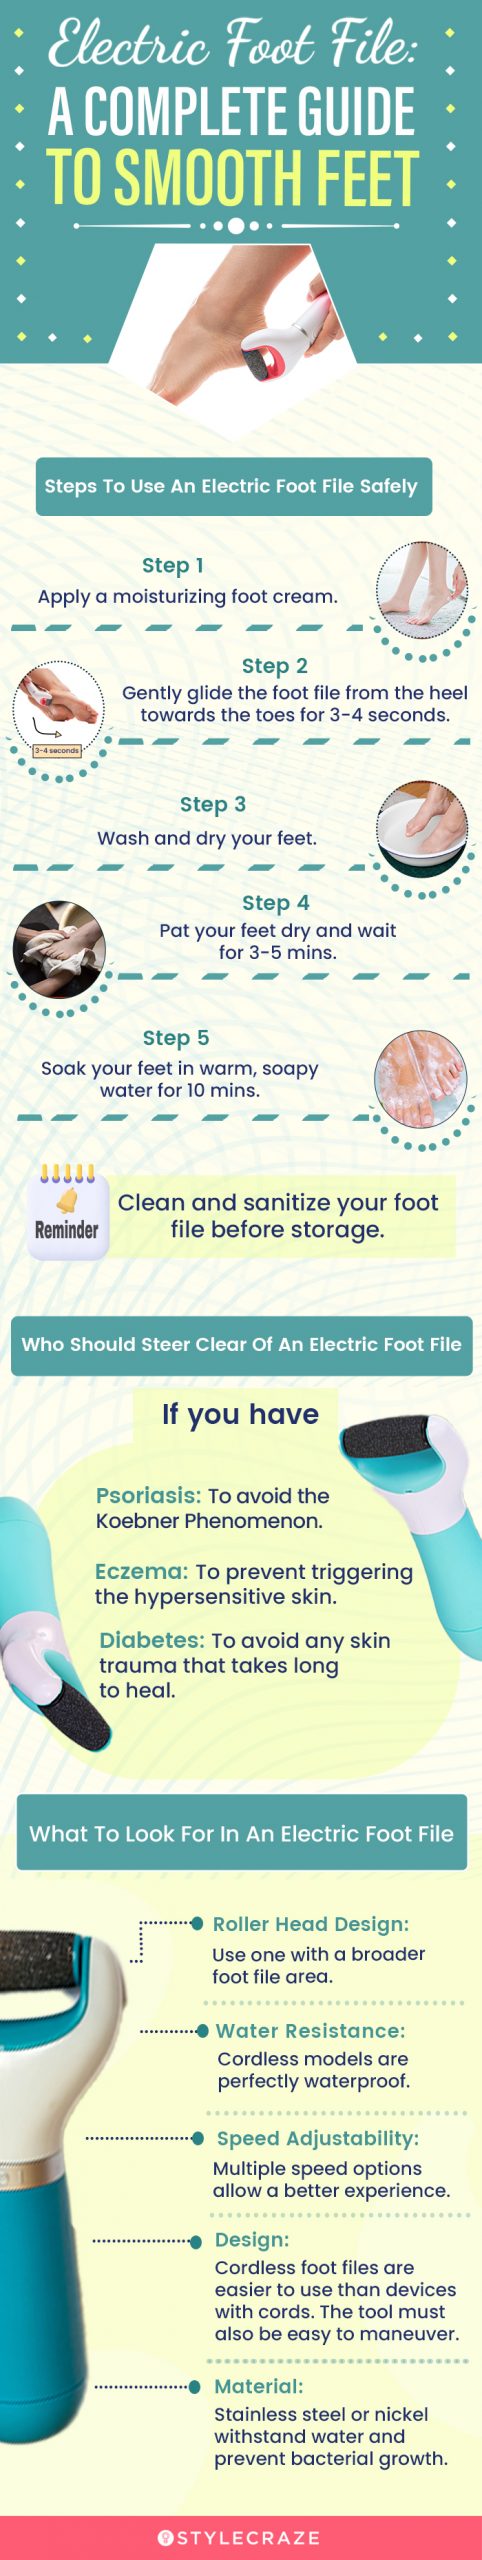 Electric Foot File: A Complete Guide To Smooth Feet (infographic)